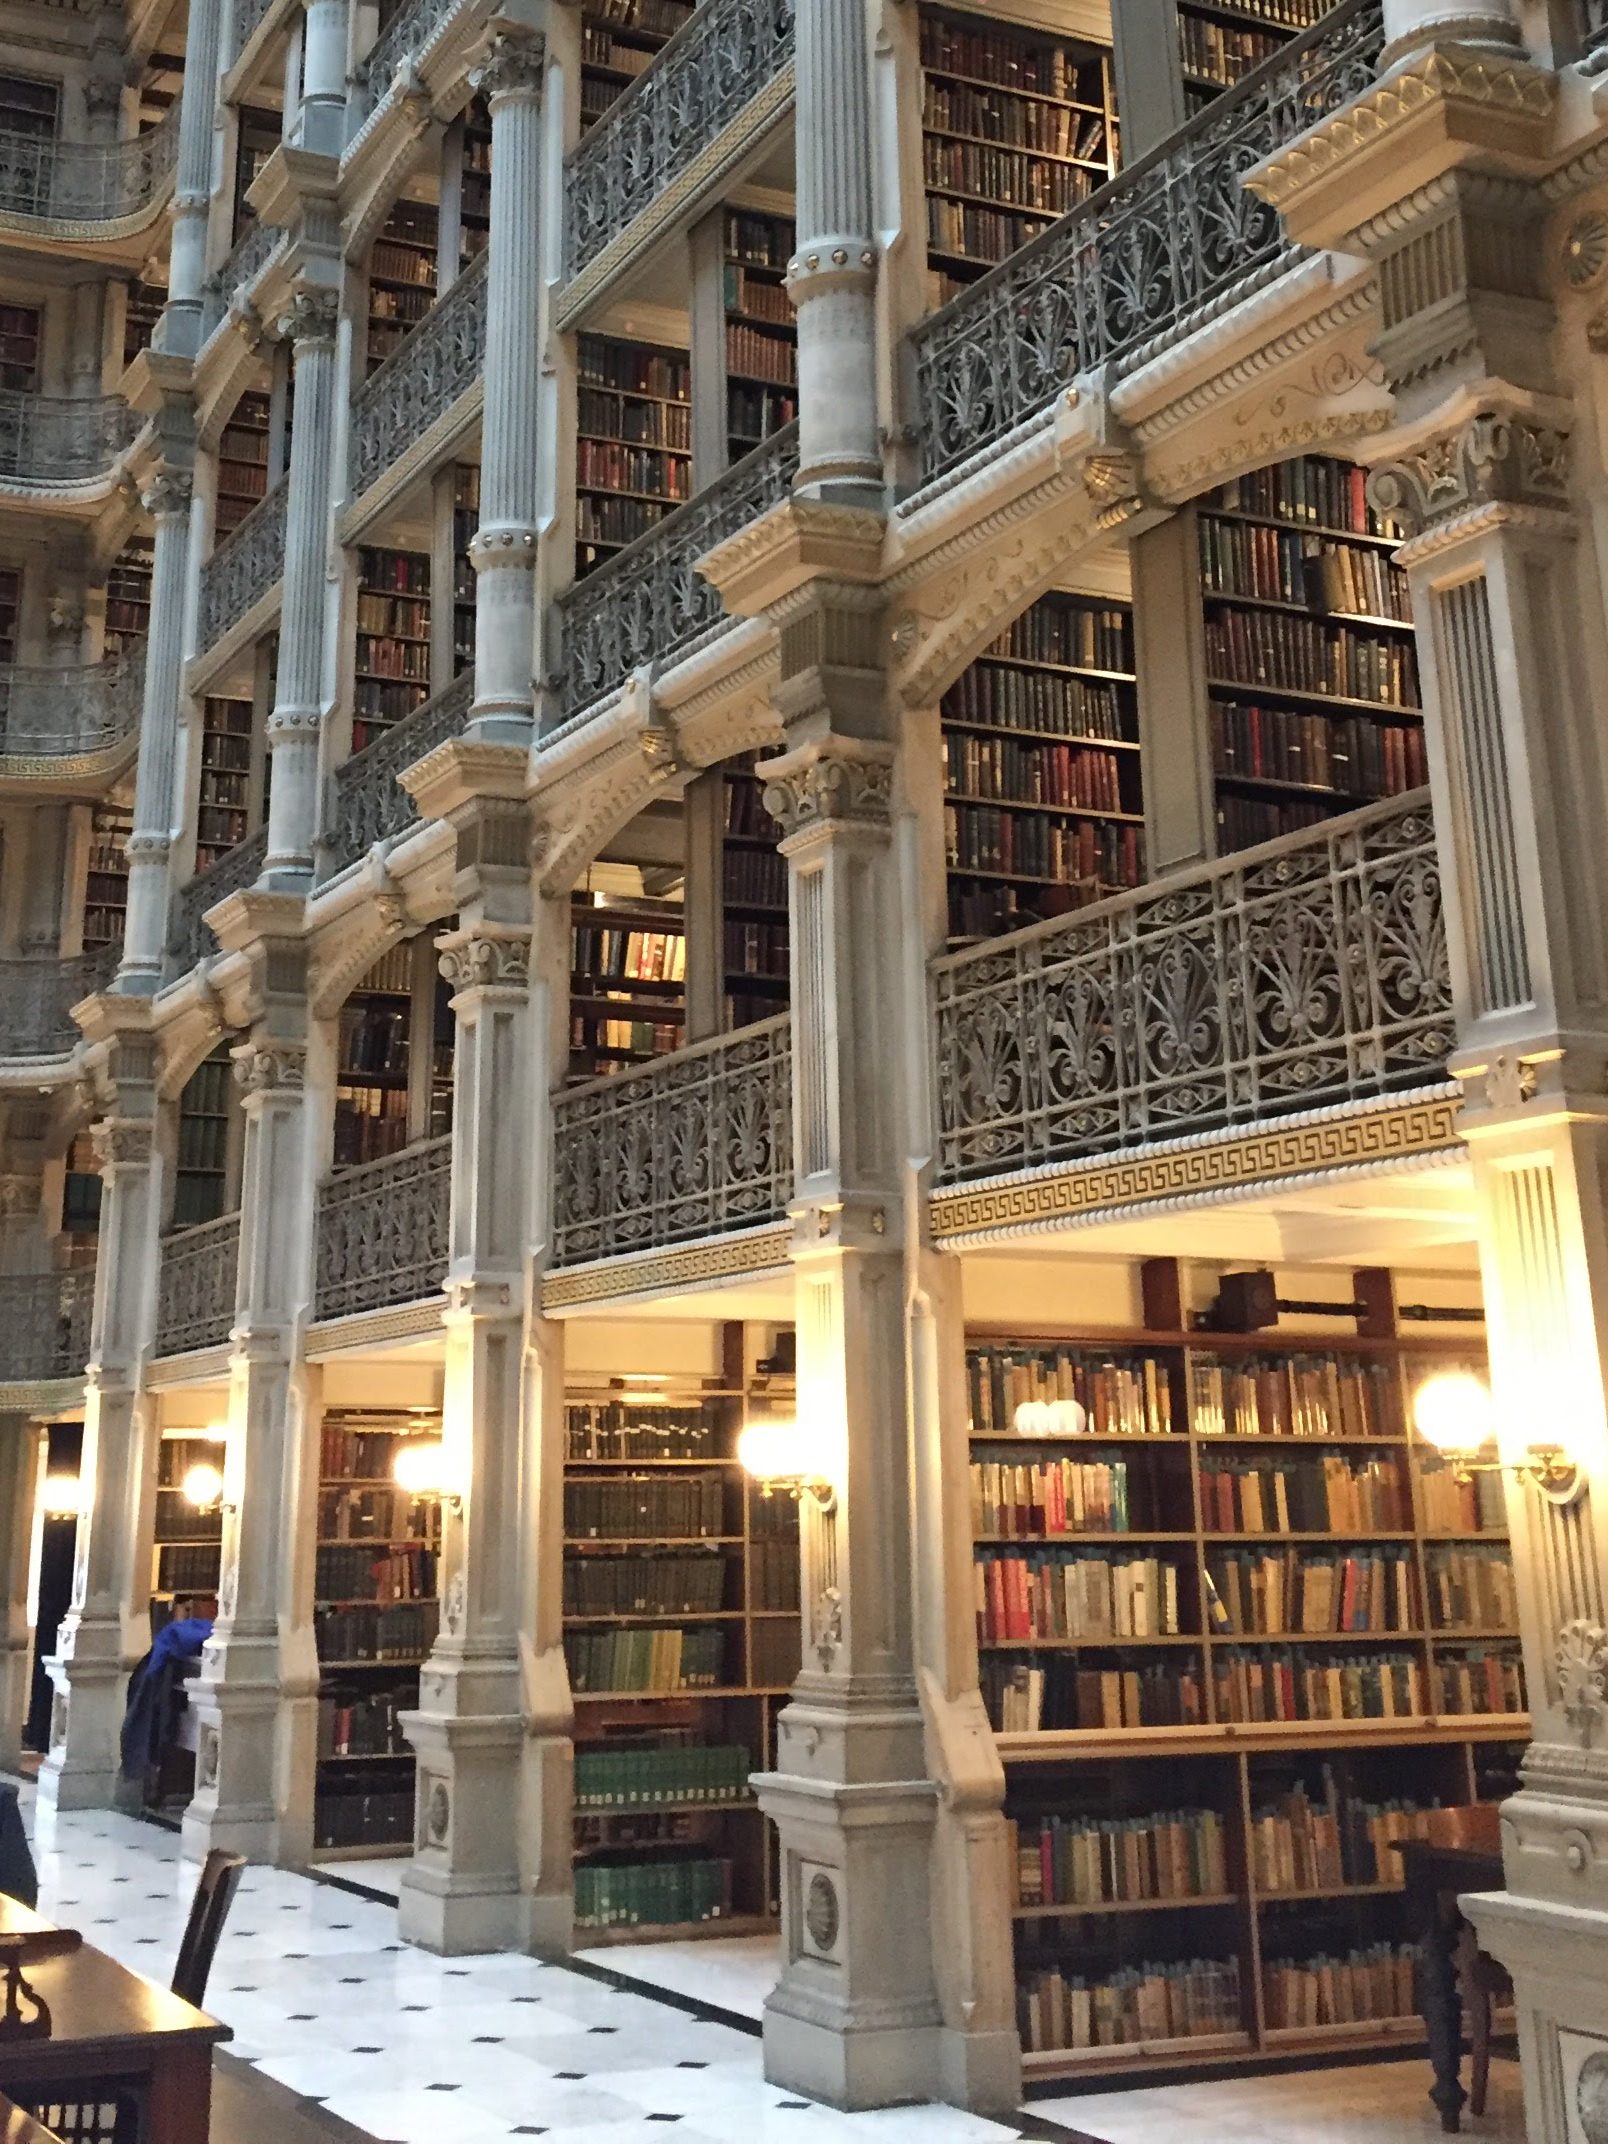 George Peabody Library, Baltimore, MD, U.S.A.